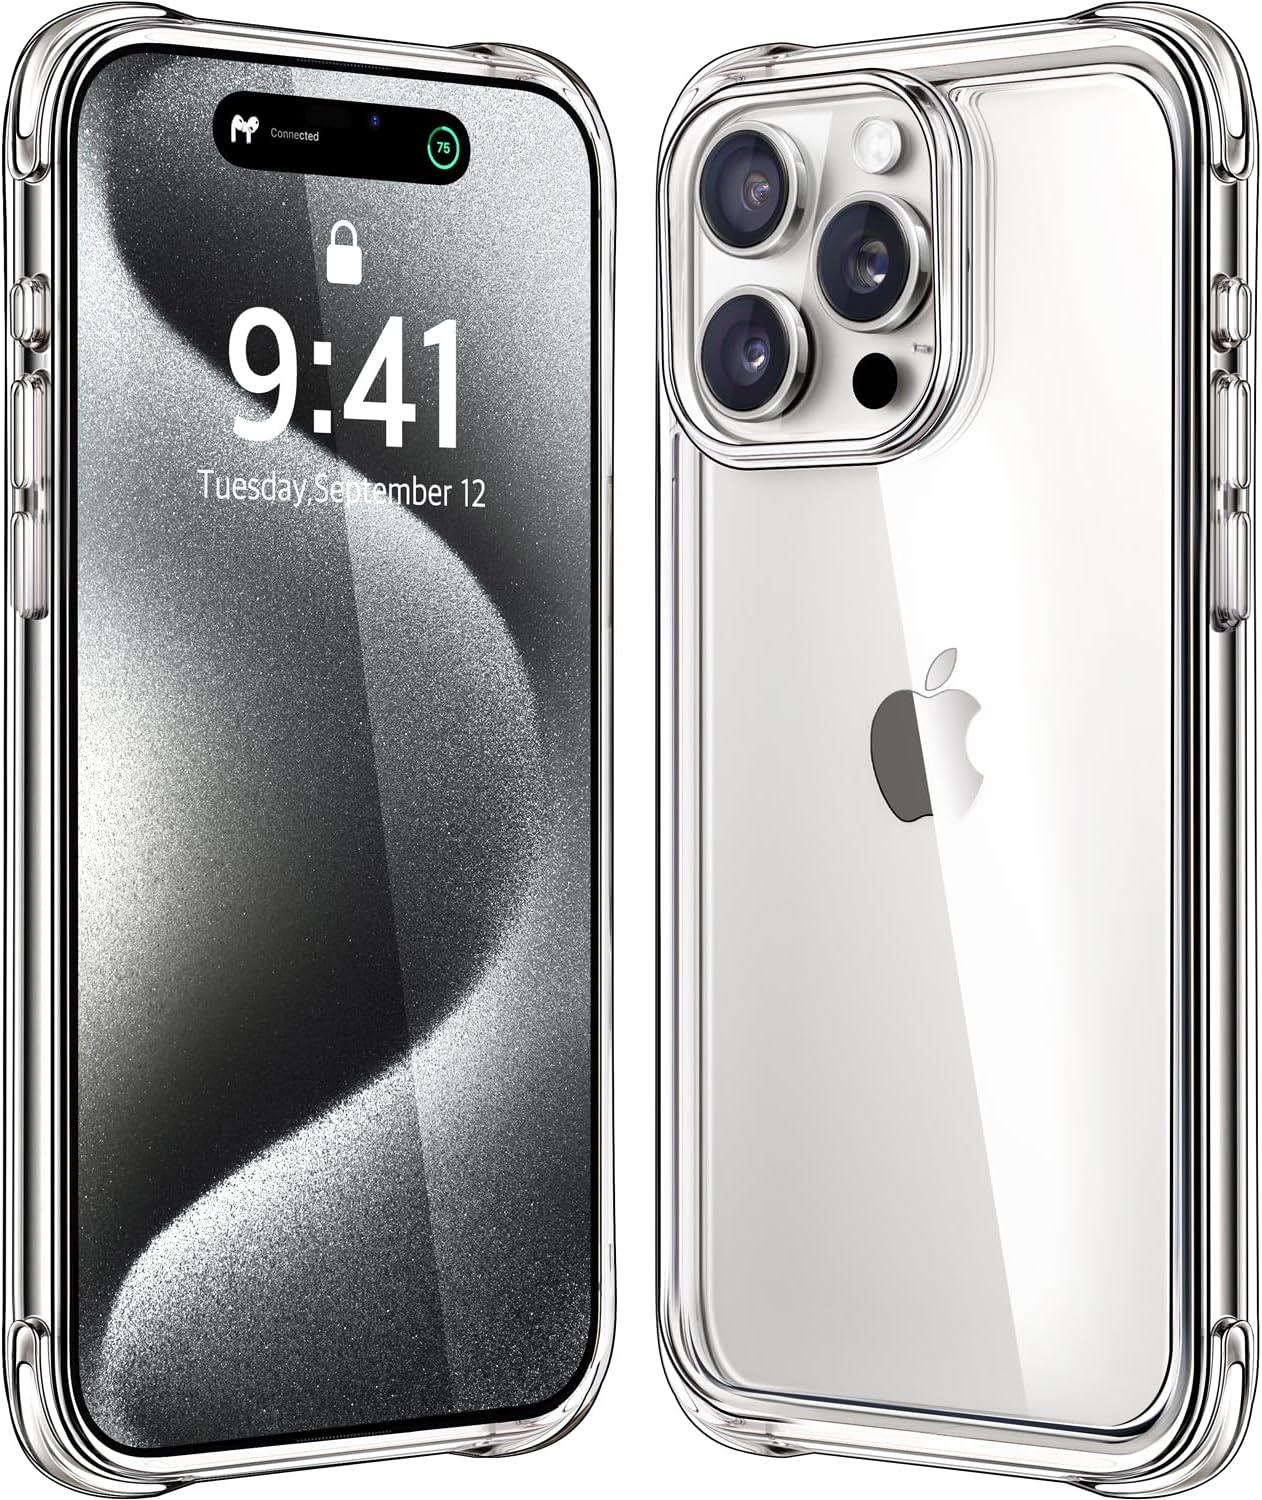 This is a good quality iPhone 15 pro case. It is thick enough to protect my phone without it being too bulky. I can easily slide my phone in my pocket. It is easy to take on and off- easy to wipe off. I drop my phone a lot, and this has kept it protected and in good working order.